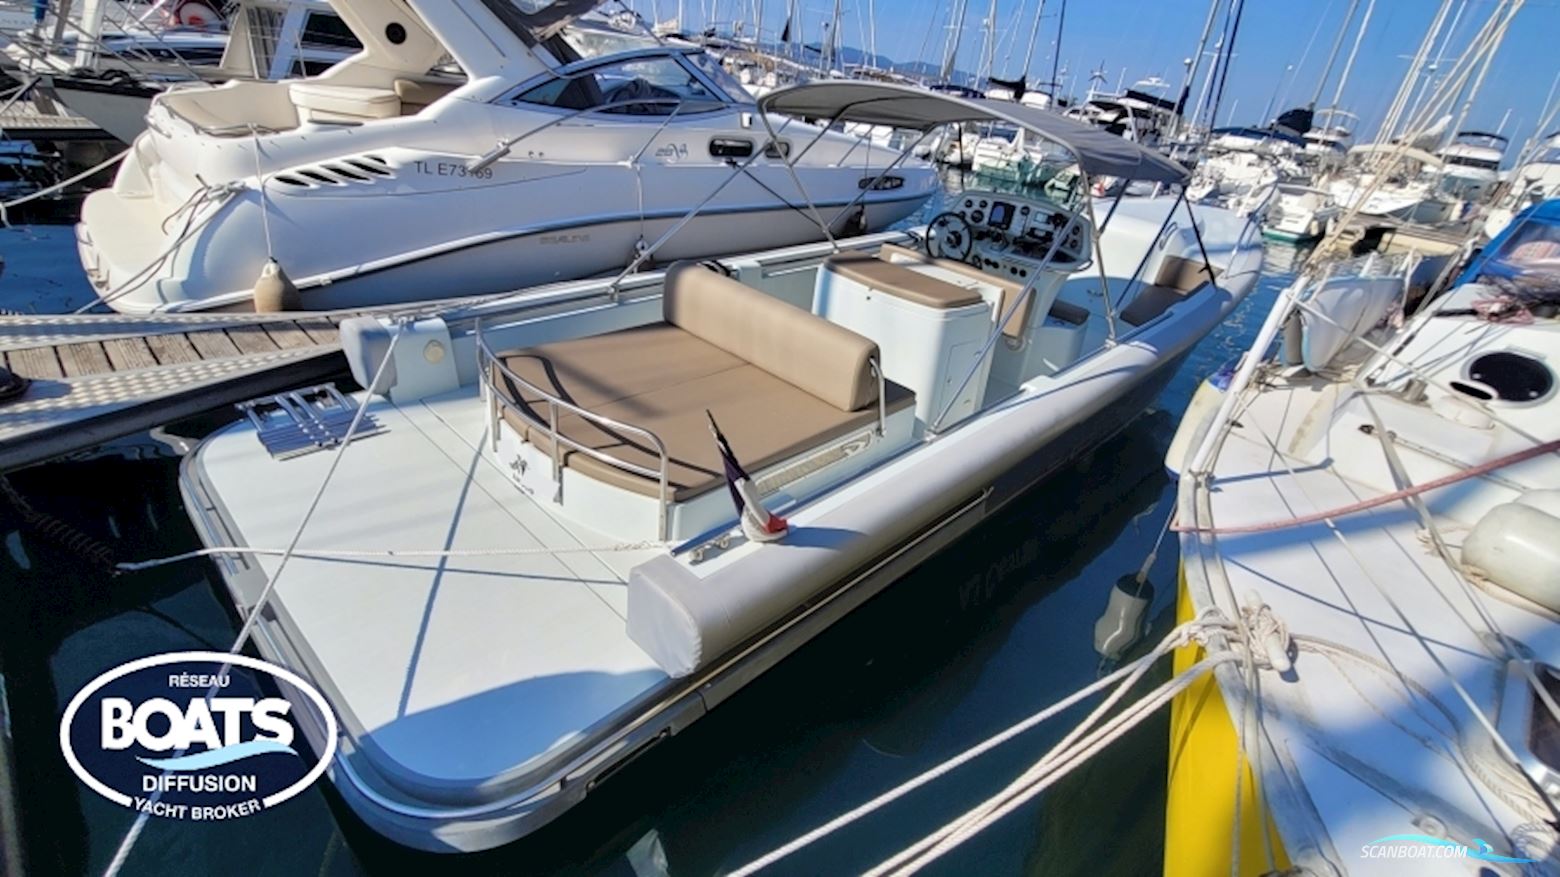 Expression 29 Motor boat 2005, with Mercruiser engine, France